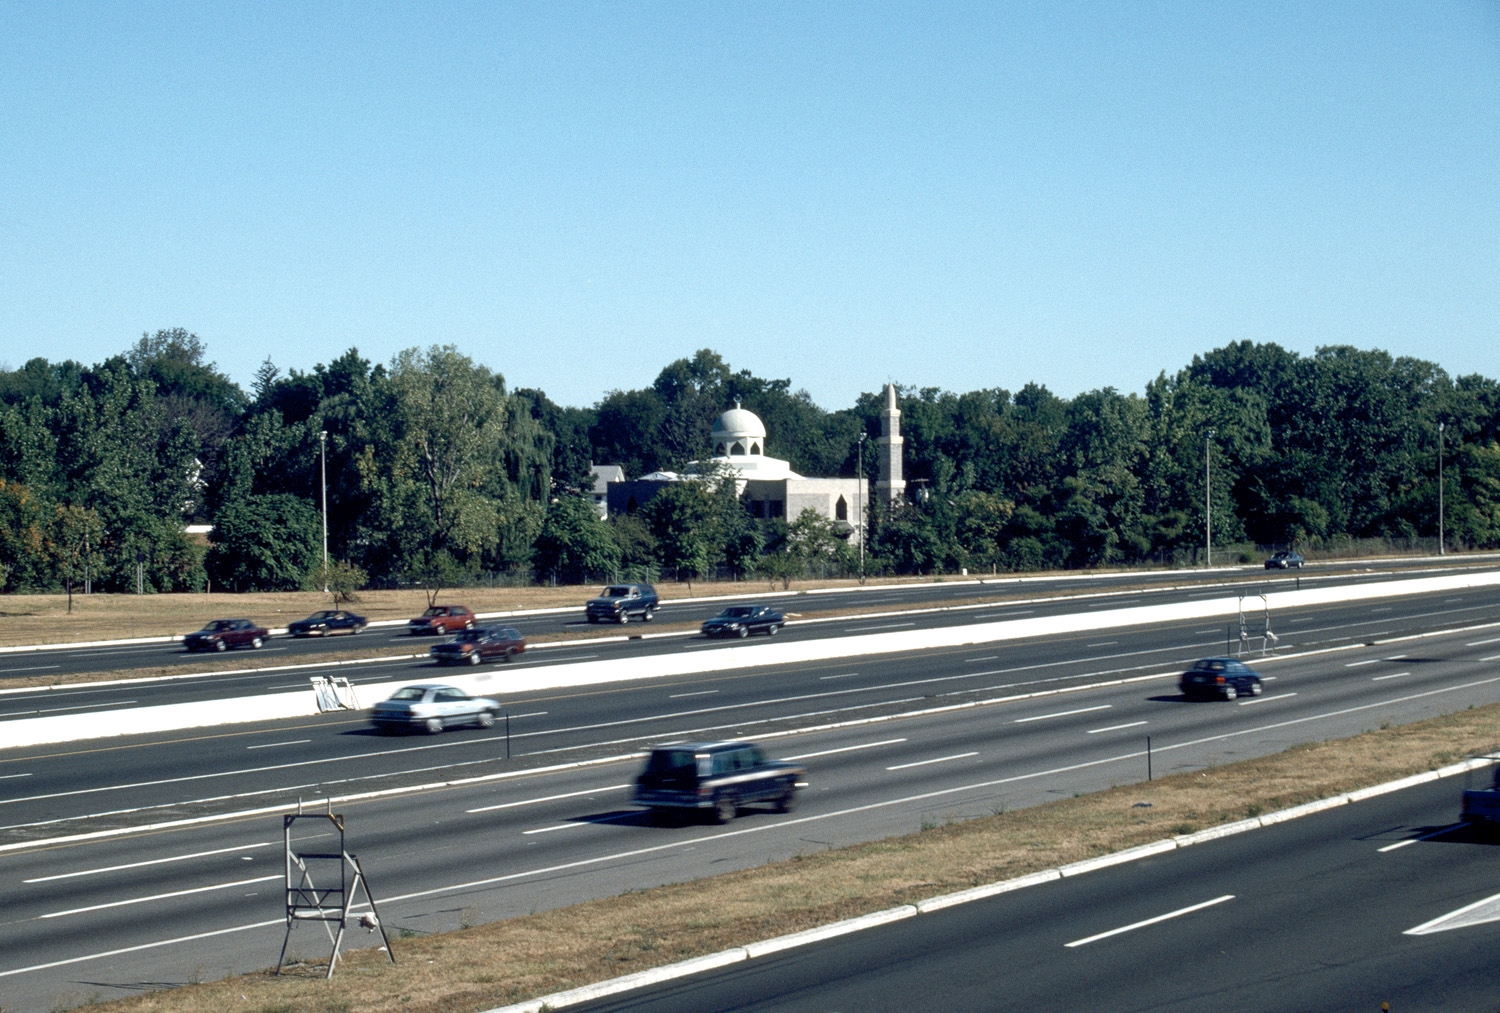 View looking west across the New Jersey Turnpike to Dar-ul-Islah, showing situation near highway